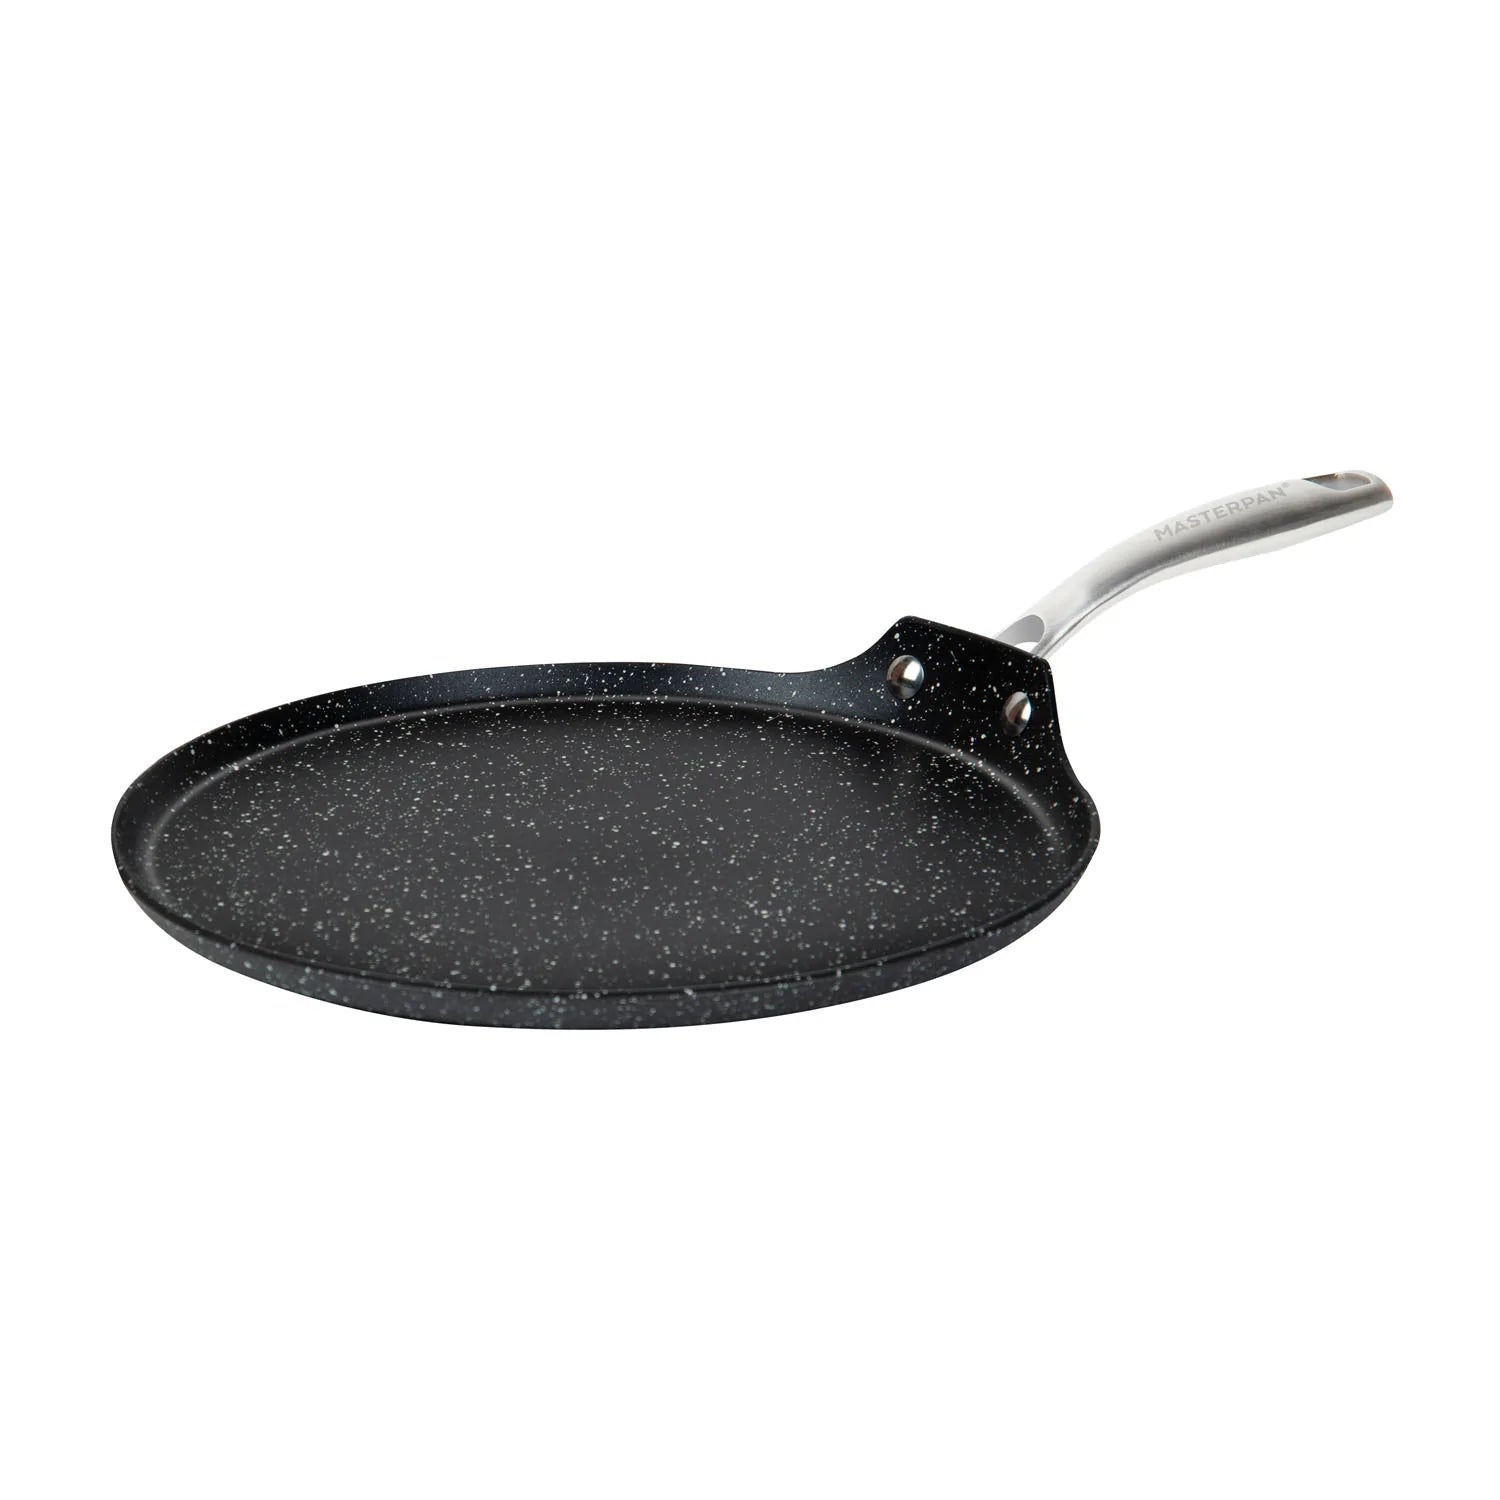 https://kitchenoasis.com/cdn/shop/files/MASTERPAN-Innovative-Series-11-Crepe-Pan-Non-stick-Aluminum-Cookware-With-Stainless-Steel-Riveted-Handle-2.webp?v=1685841895&width=1946